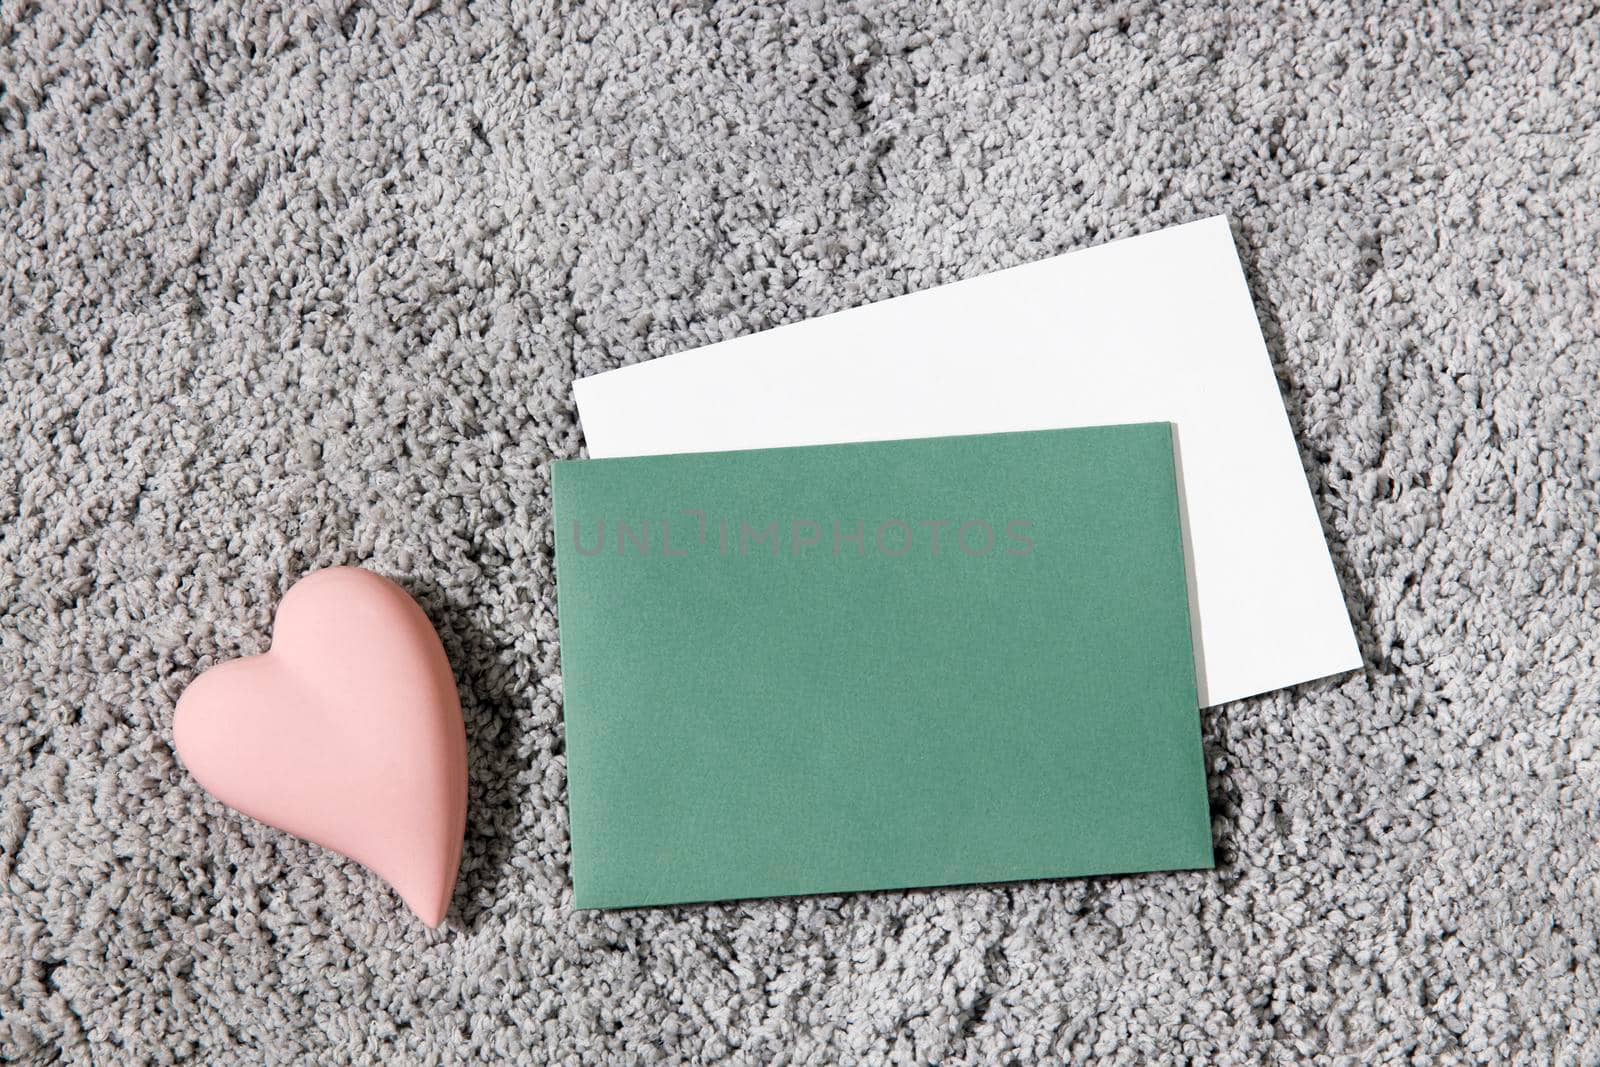 Greeting card for Valentine's Day. White and green envelopes, ceramic pink heart on a grey fluffy carpet background. Copy space. Place for text